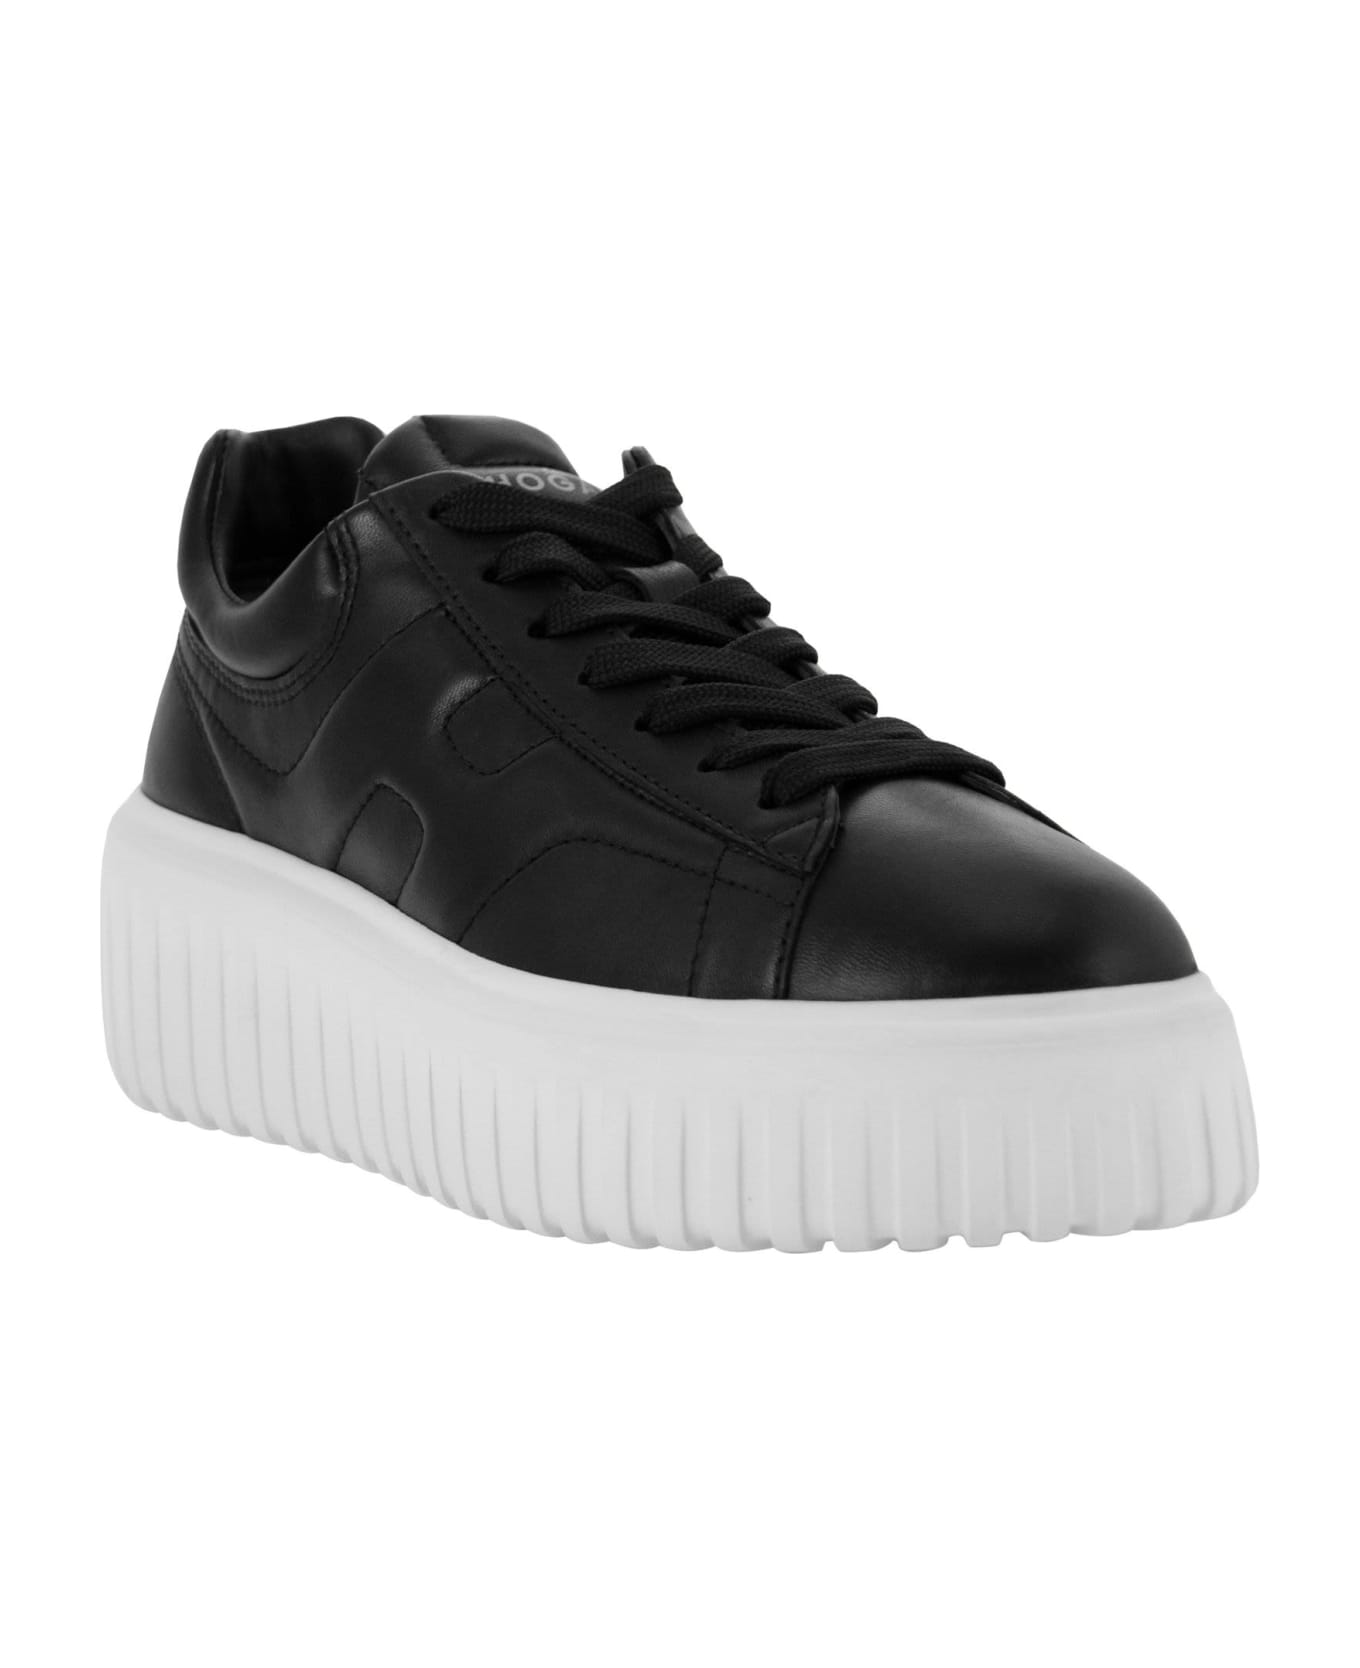 Hogan H-stripes Sneakers In Nappa Leather - Black/white